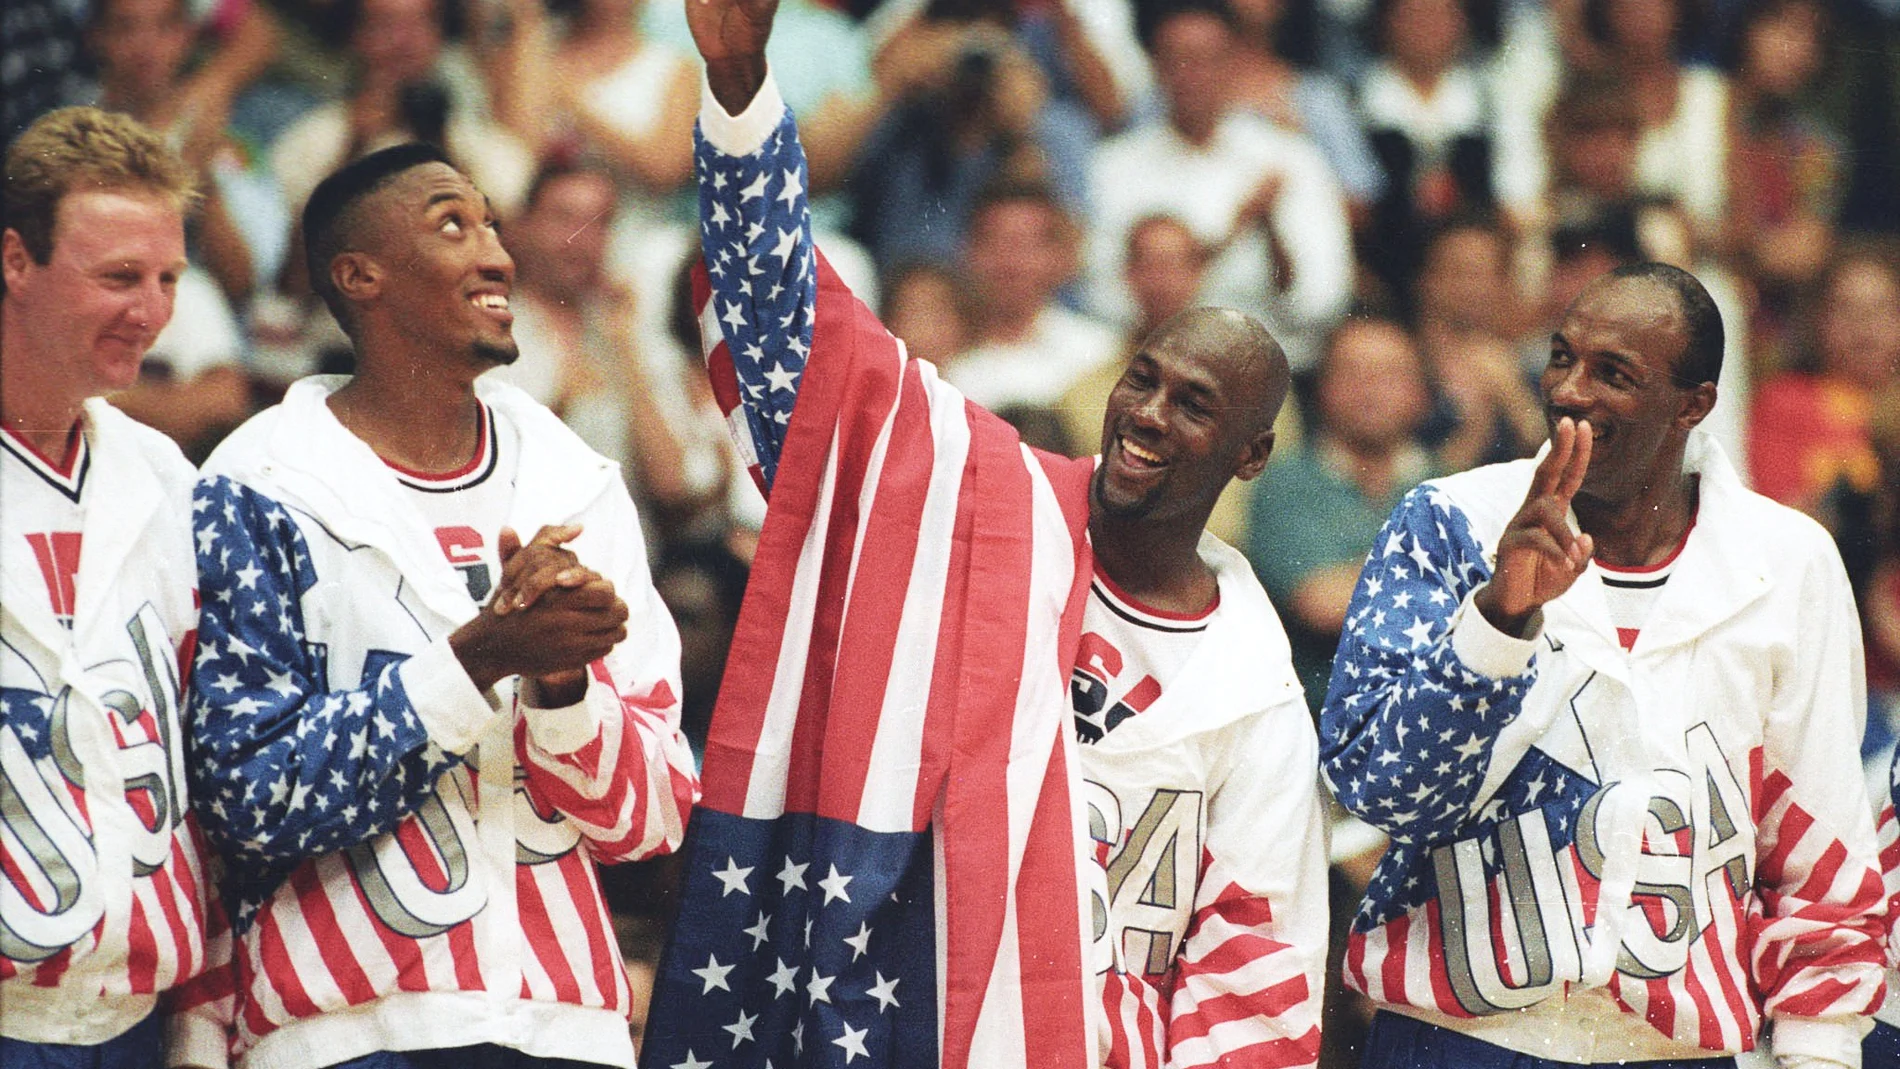 FILE PHOTO: U.S. basketball player Michael Jordan flashes a victory sign as he stands with team mates Larry Bird, Scottie Pippen and Clyde Drexler after winning the Olympic gold in Barcelona